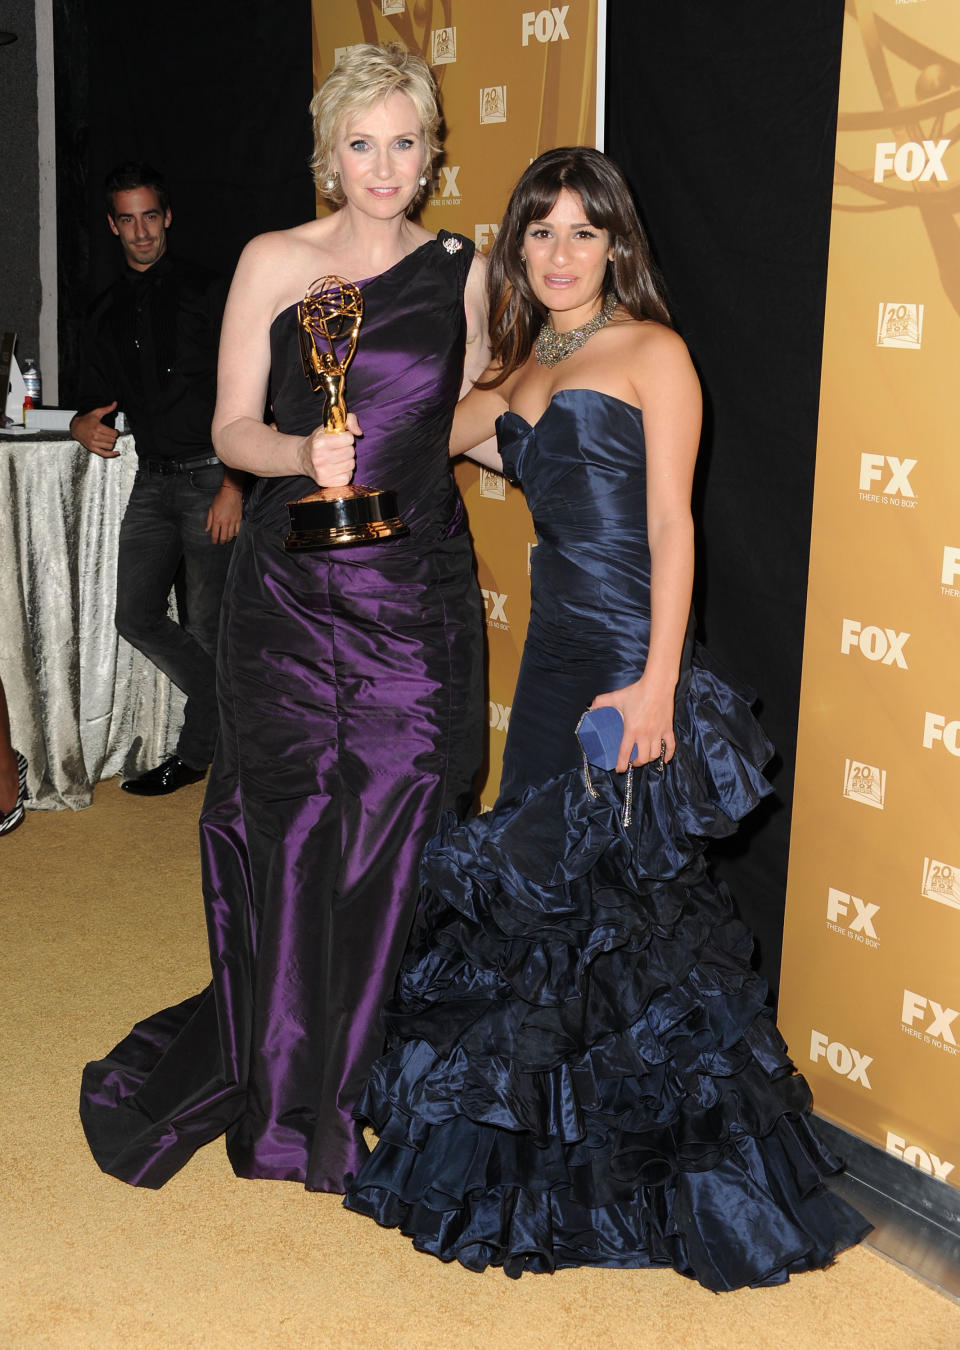 Jane Lynch and Lea Michele in 2010 - Credit: Getty